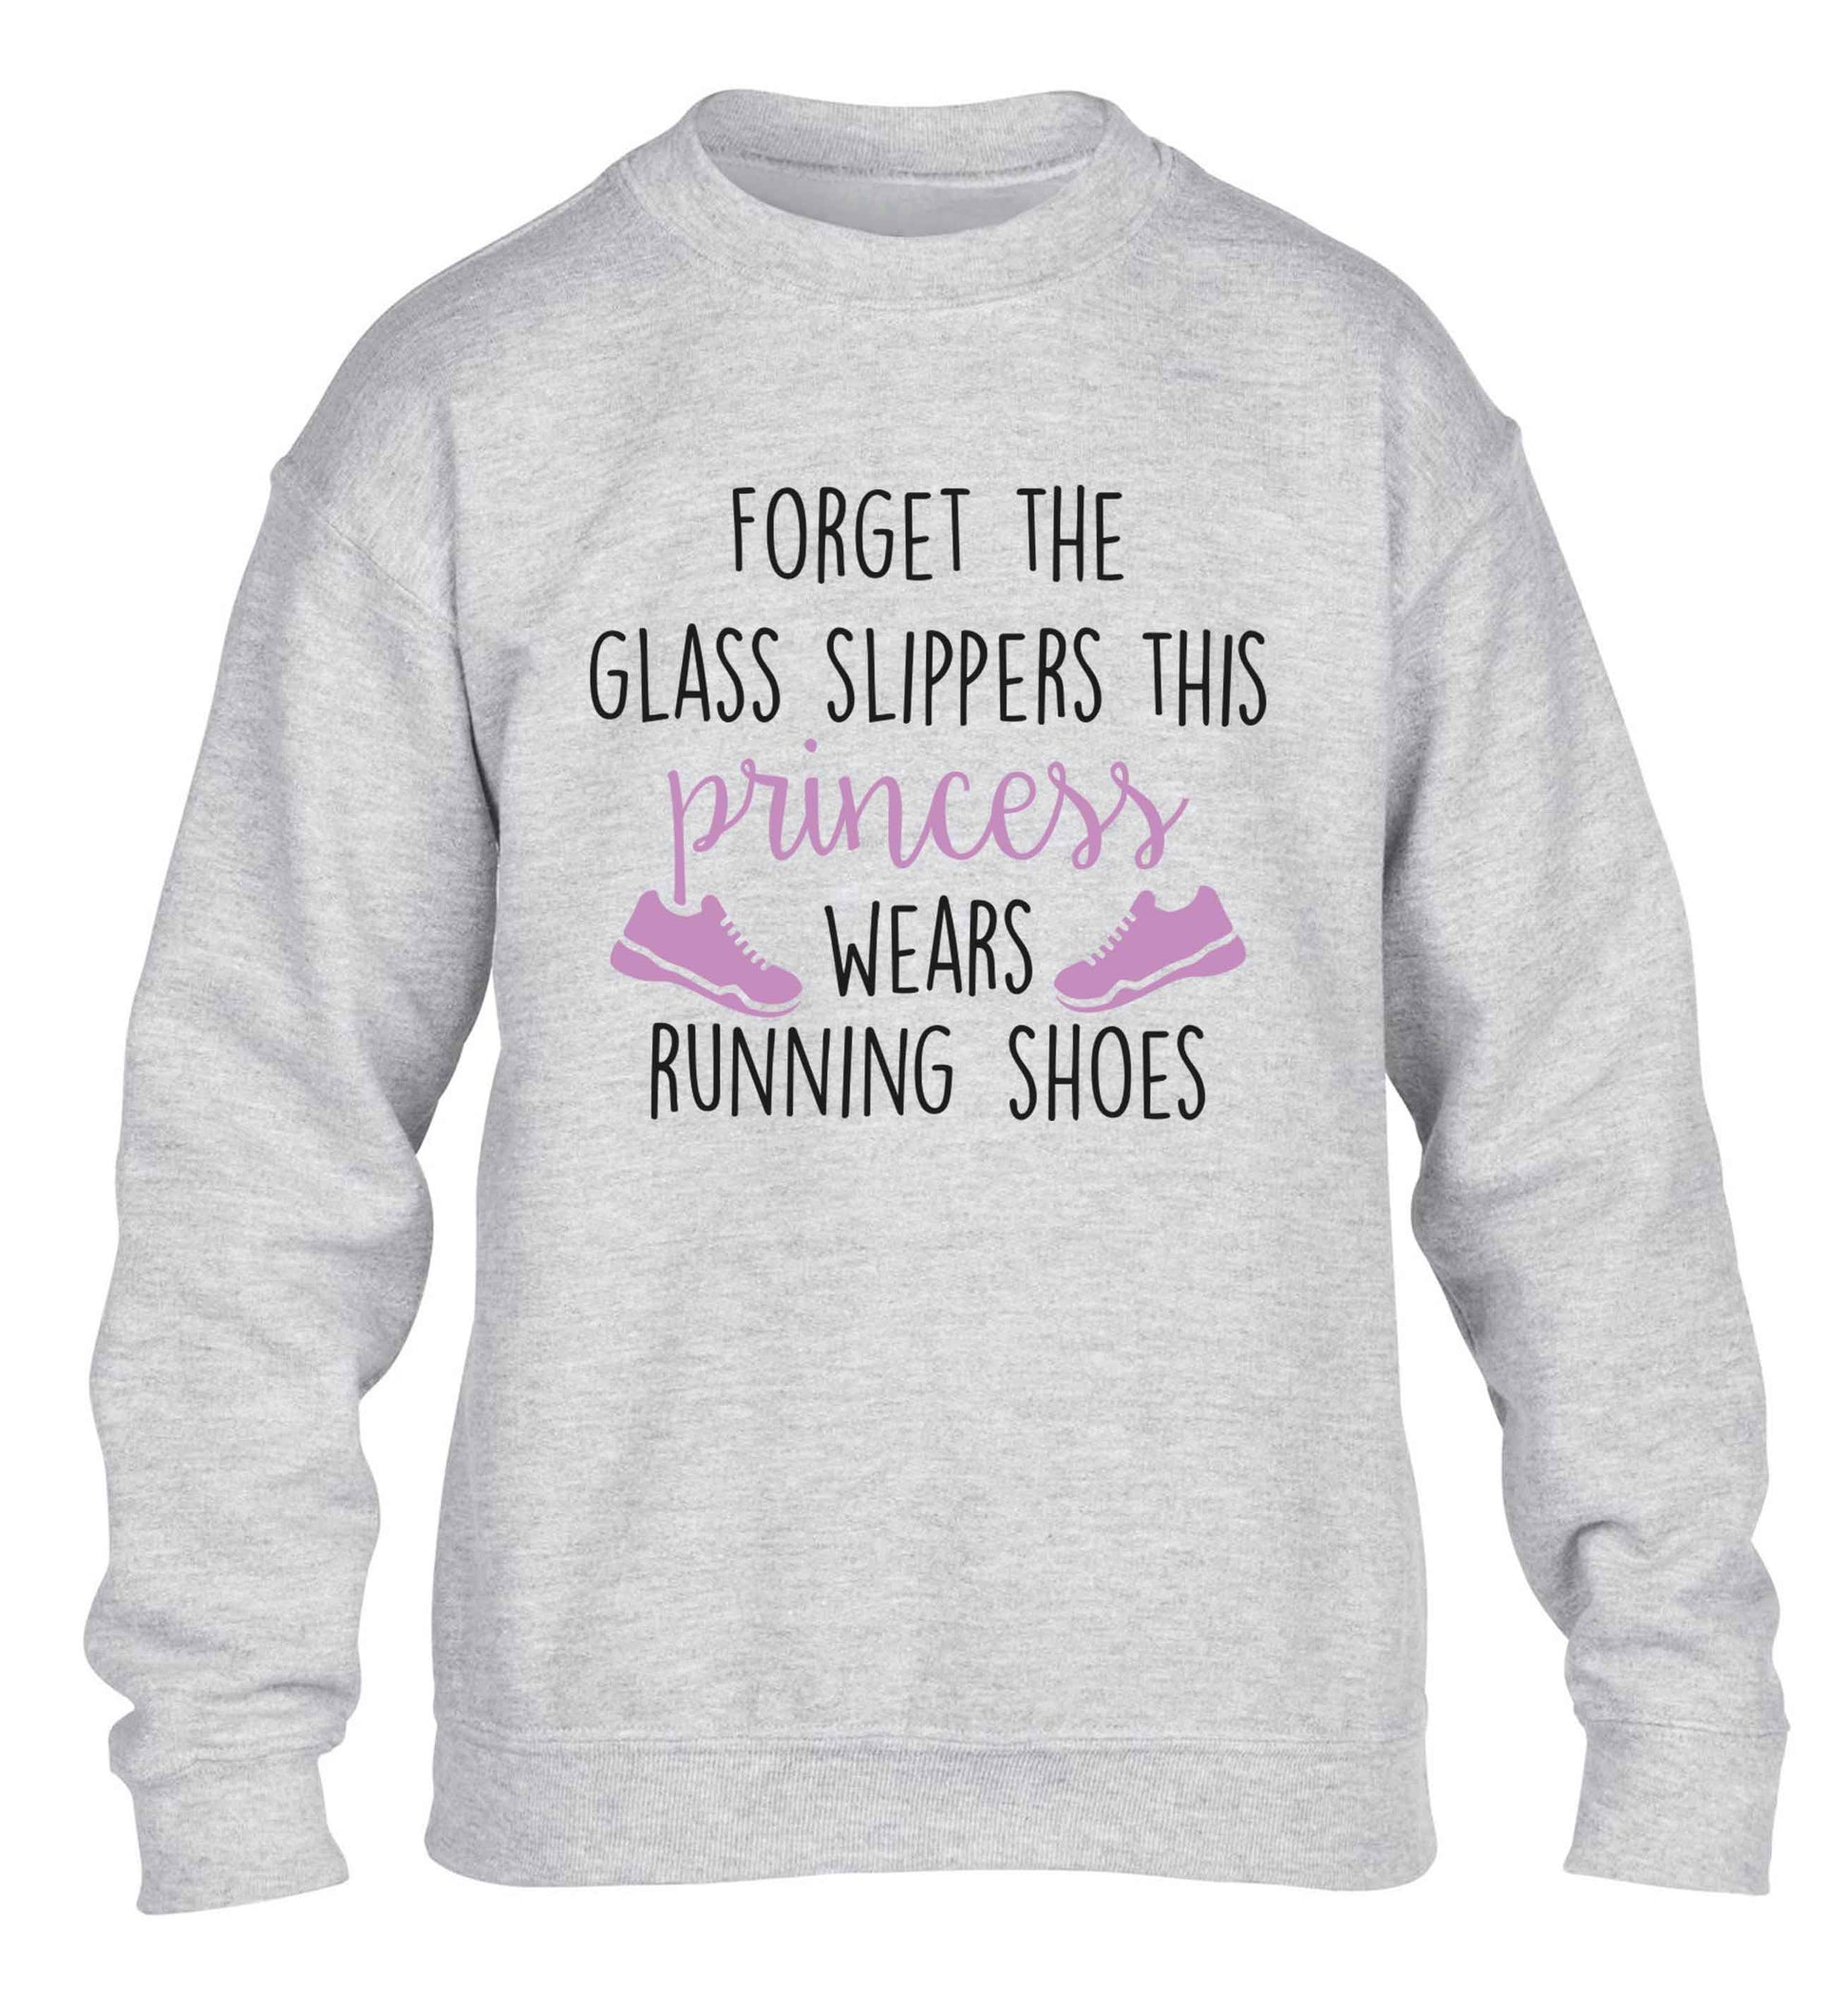 Forget the glass slippers this princess wears running shoes children's grey sweater 12-13 Years